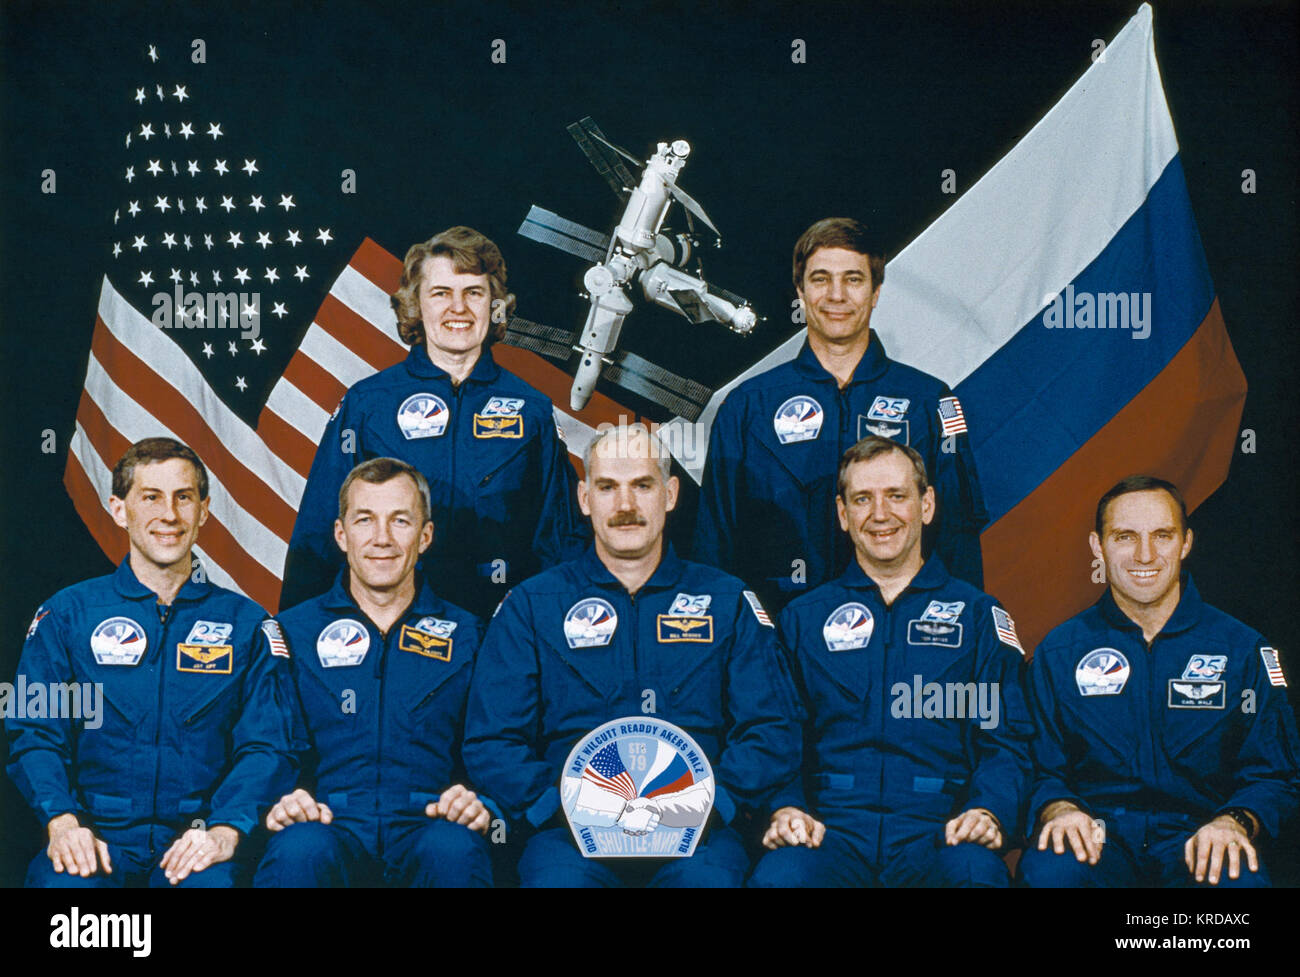 STS-79 CREW PORTRAIT FRONT L/R: APT, JEROME; WILCUTT, TERRENCE; READDY, WILLIAM; AKERS, THOMAS; WALZ, CARL. BACK L/R: LUCID, SHANNON AND BLAHA, JOHN. STS-79 crew Stock Photo